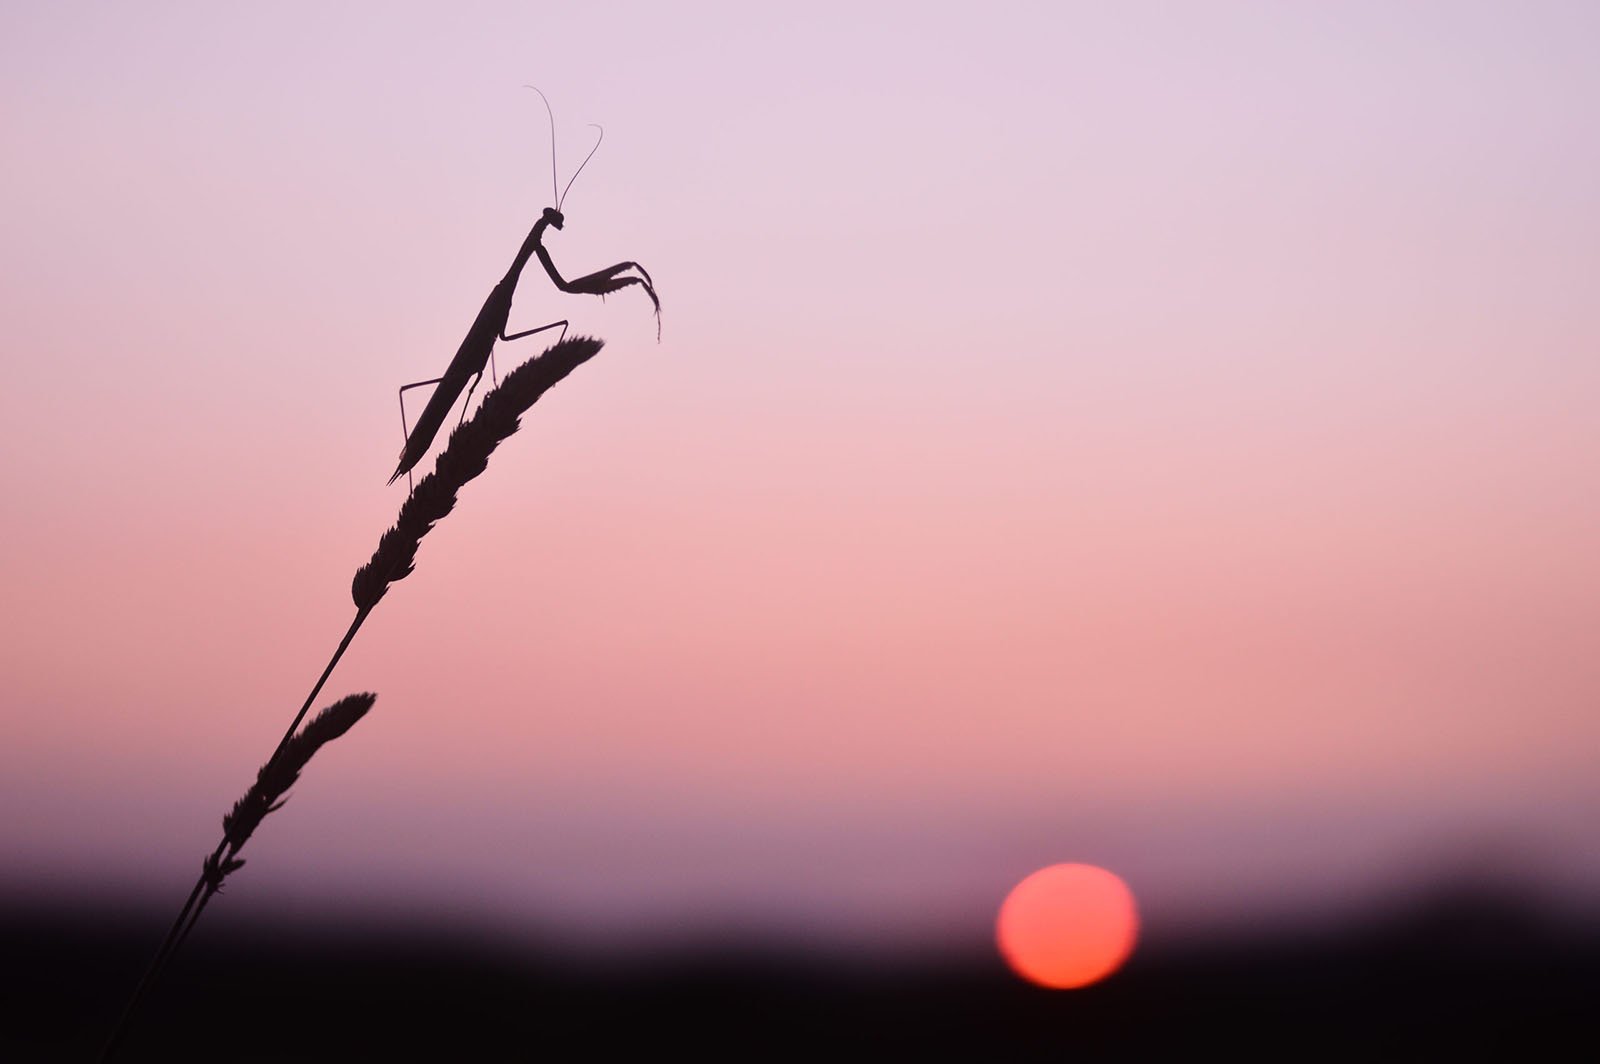 A silhouette of a praying mantis perched on a plant stalk is seen against a soft pink and purple sunset. A blurry sun is near the horizon in the background, creating a serene and peaceful atmosphere.